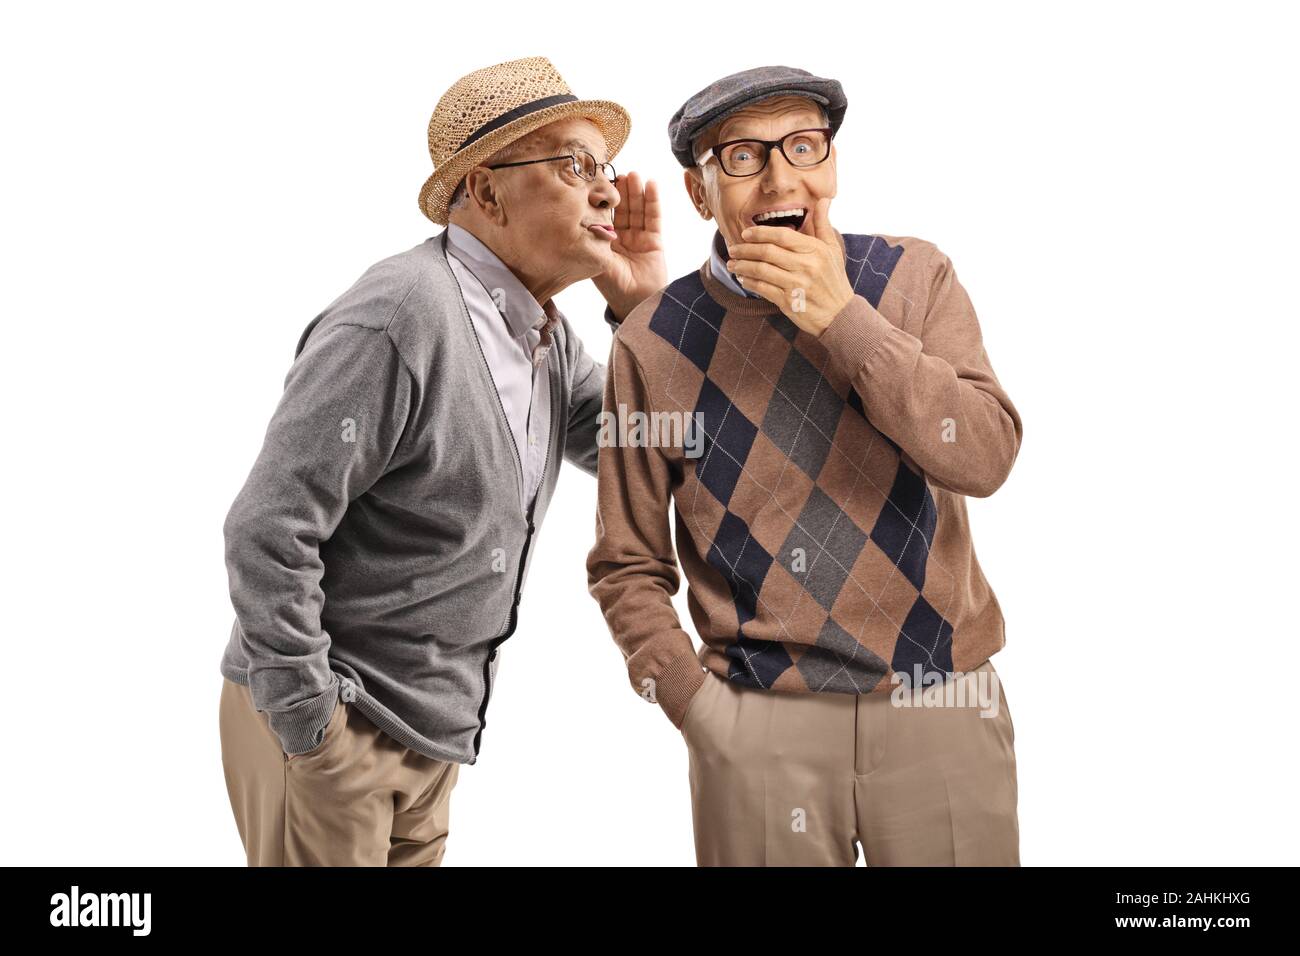 Elderly gentleman whispering a secret to another elderly man isolated on white background Stock Photo